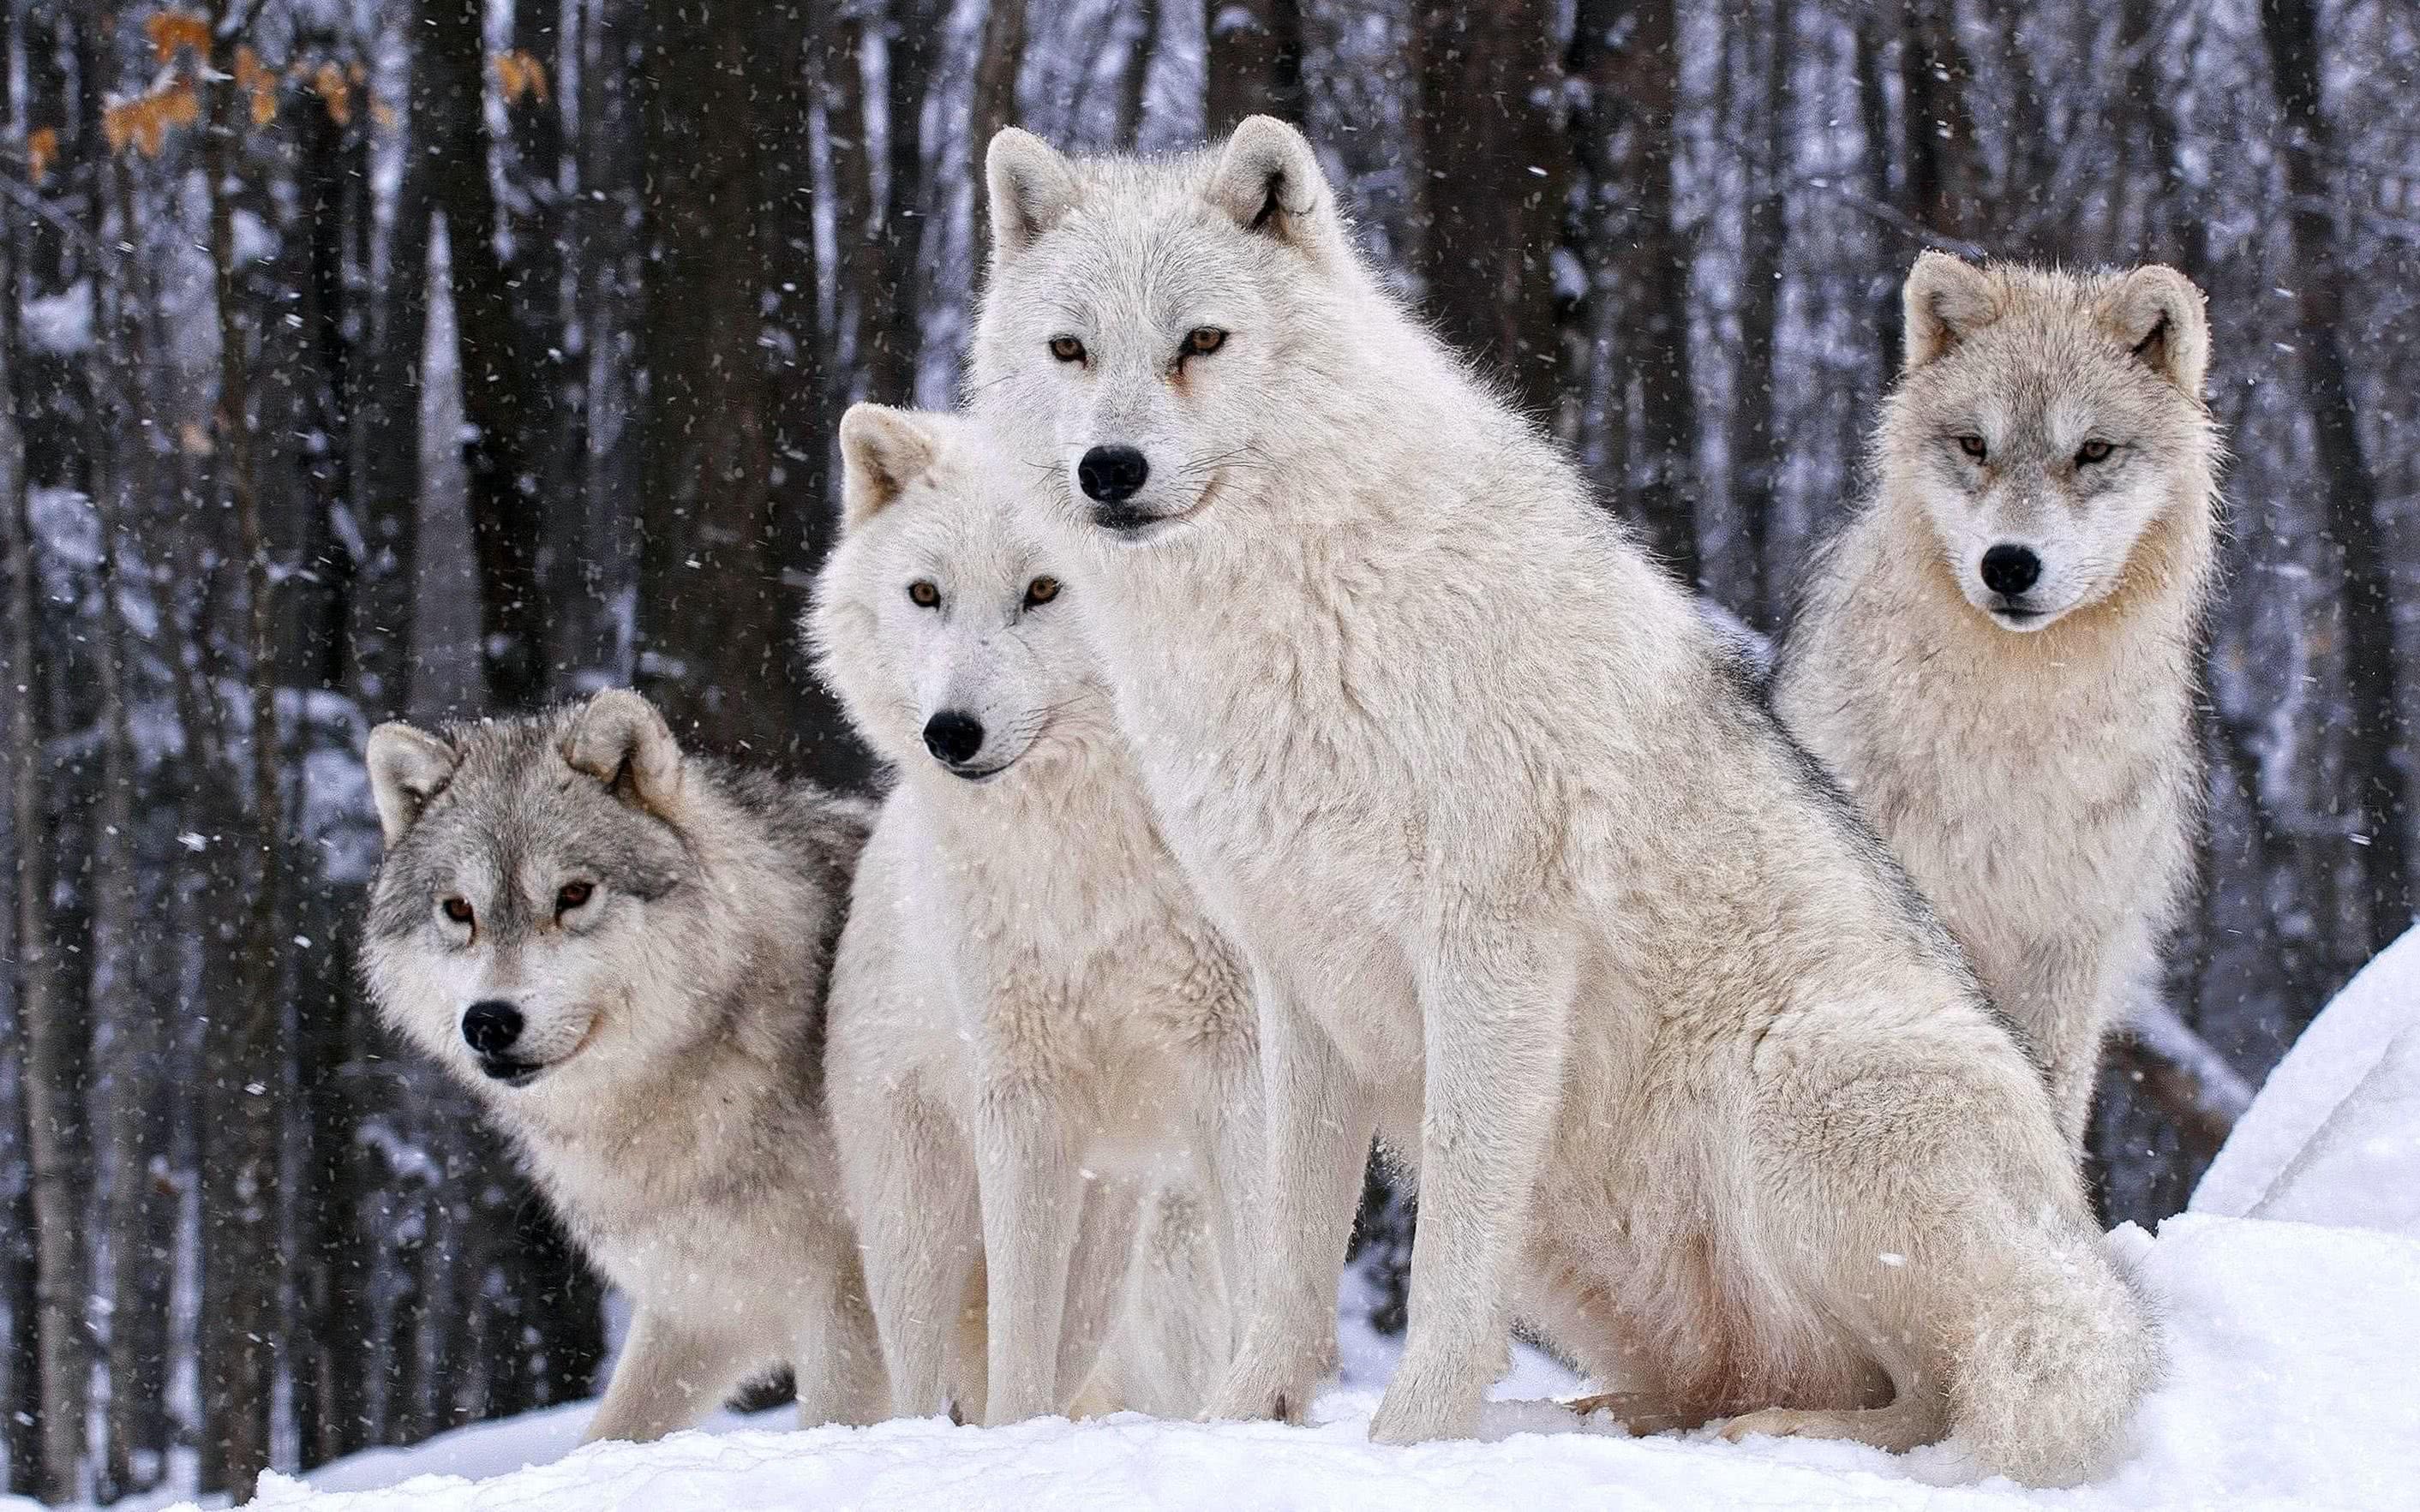 HD Wallpaper Of Wolves Image 1